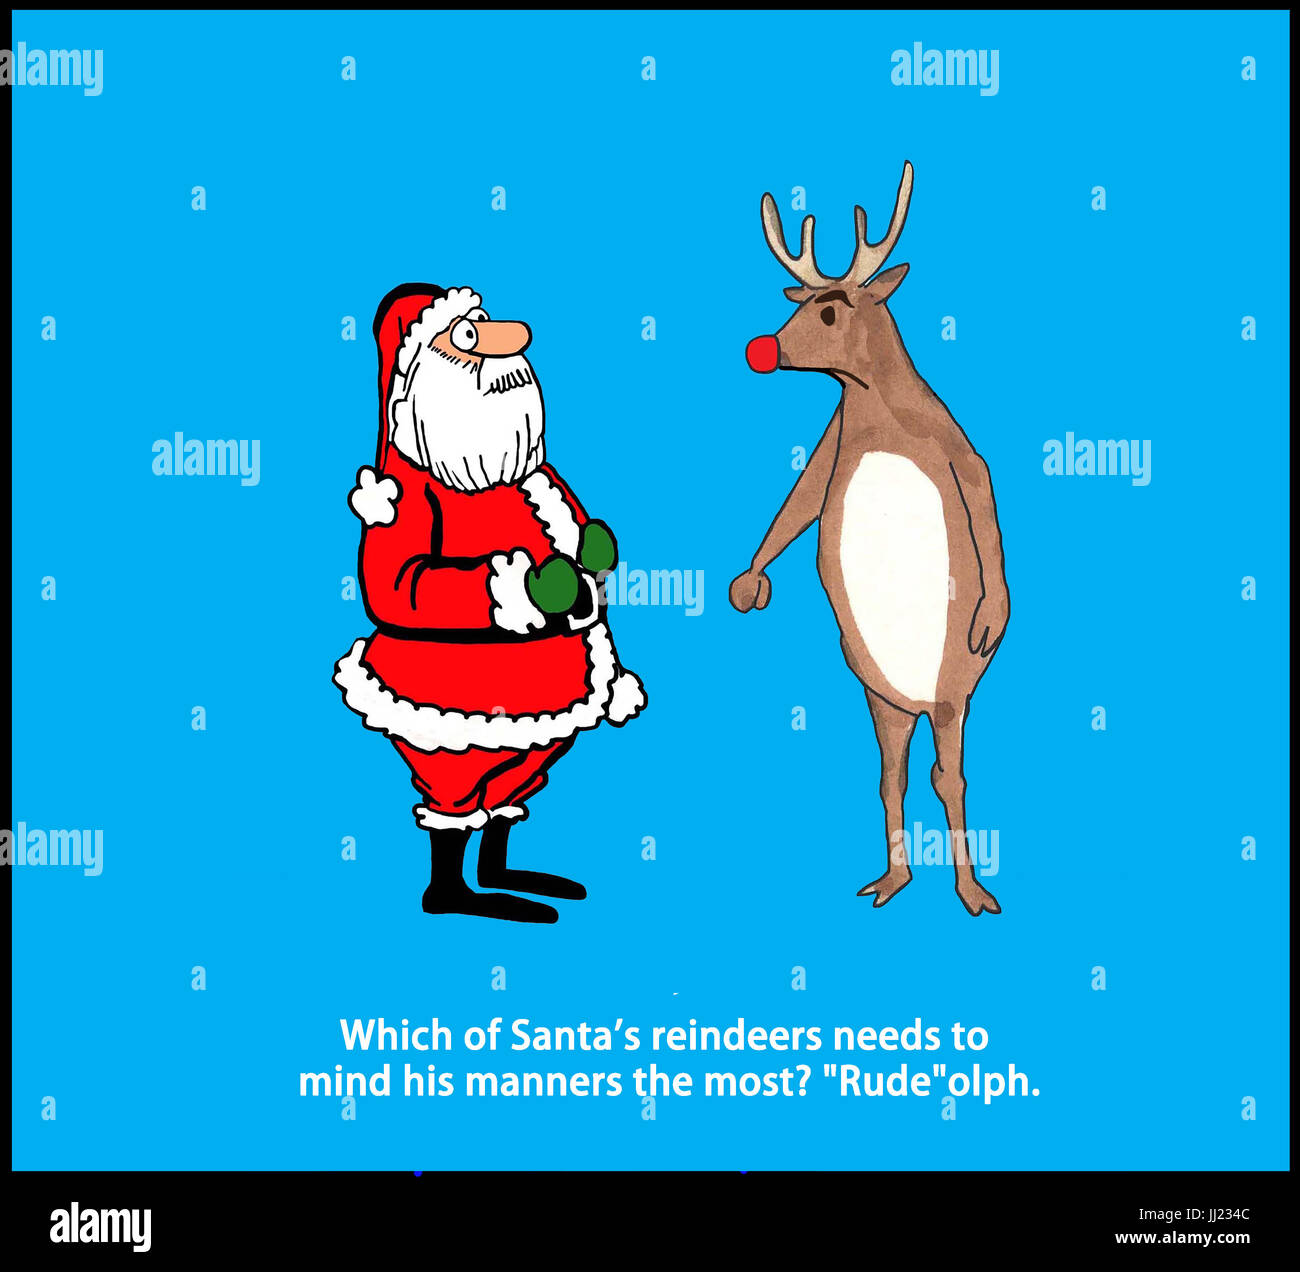 Christmas cartoon illustration of Santa Claus and the red-nosed reindeer and a pun about bad manners. Stock Photo